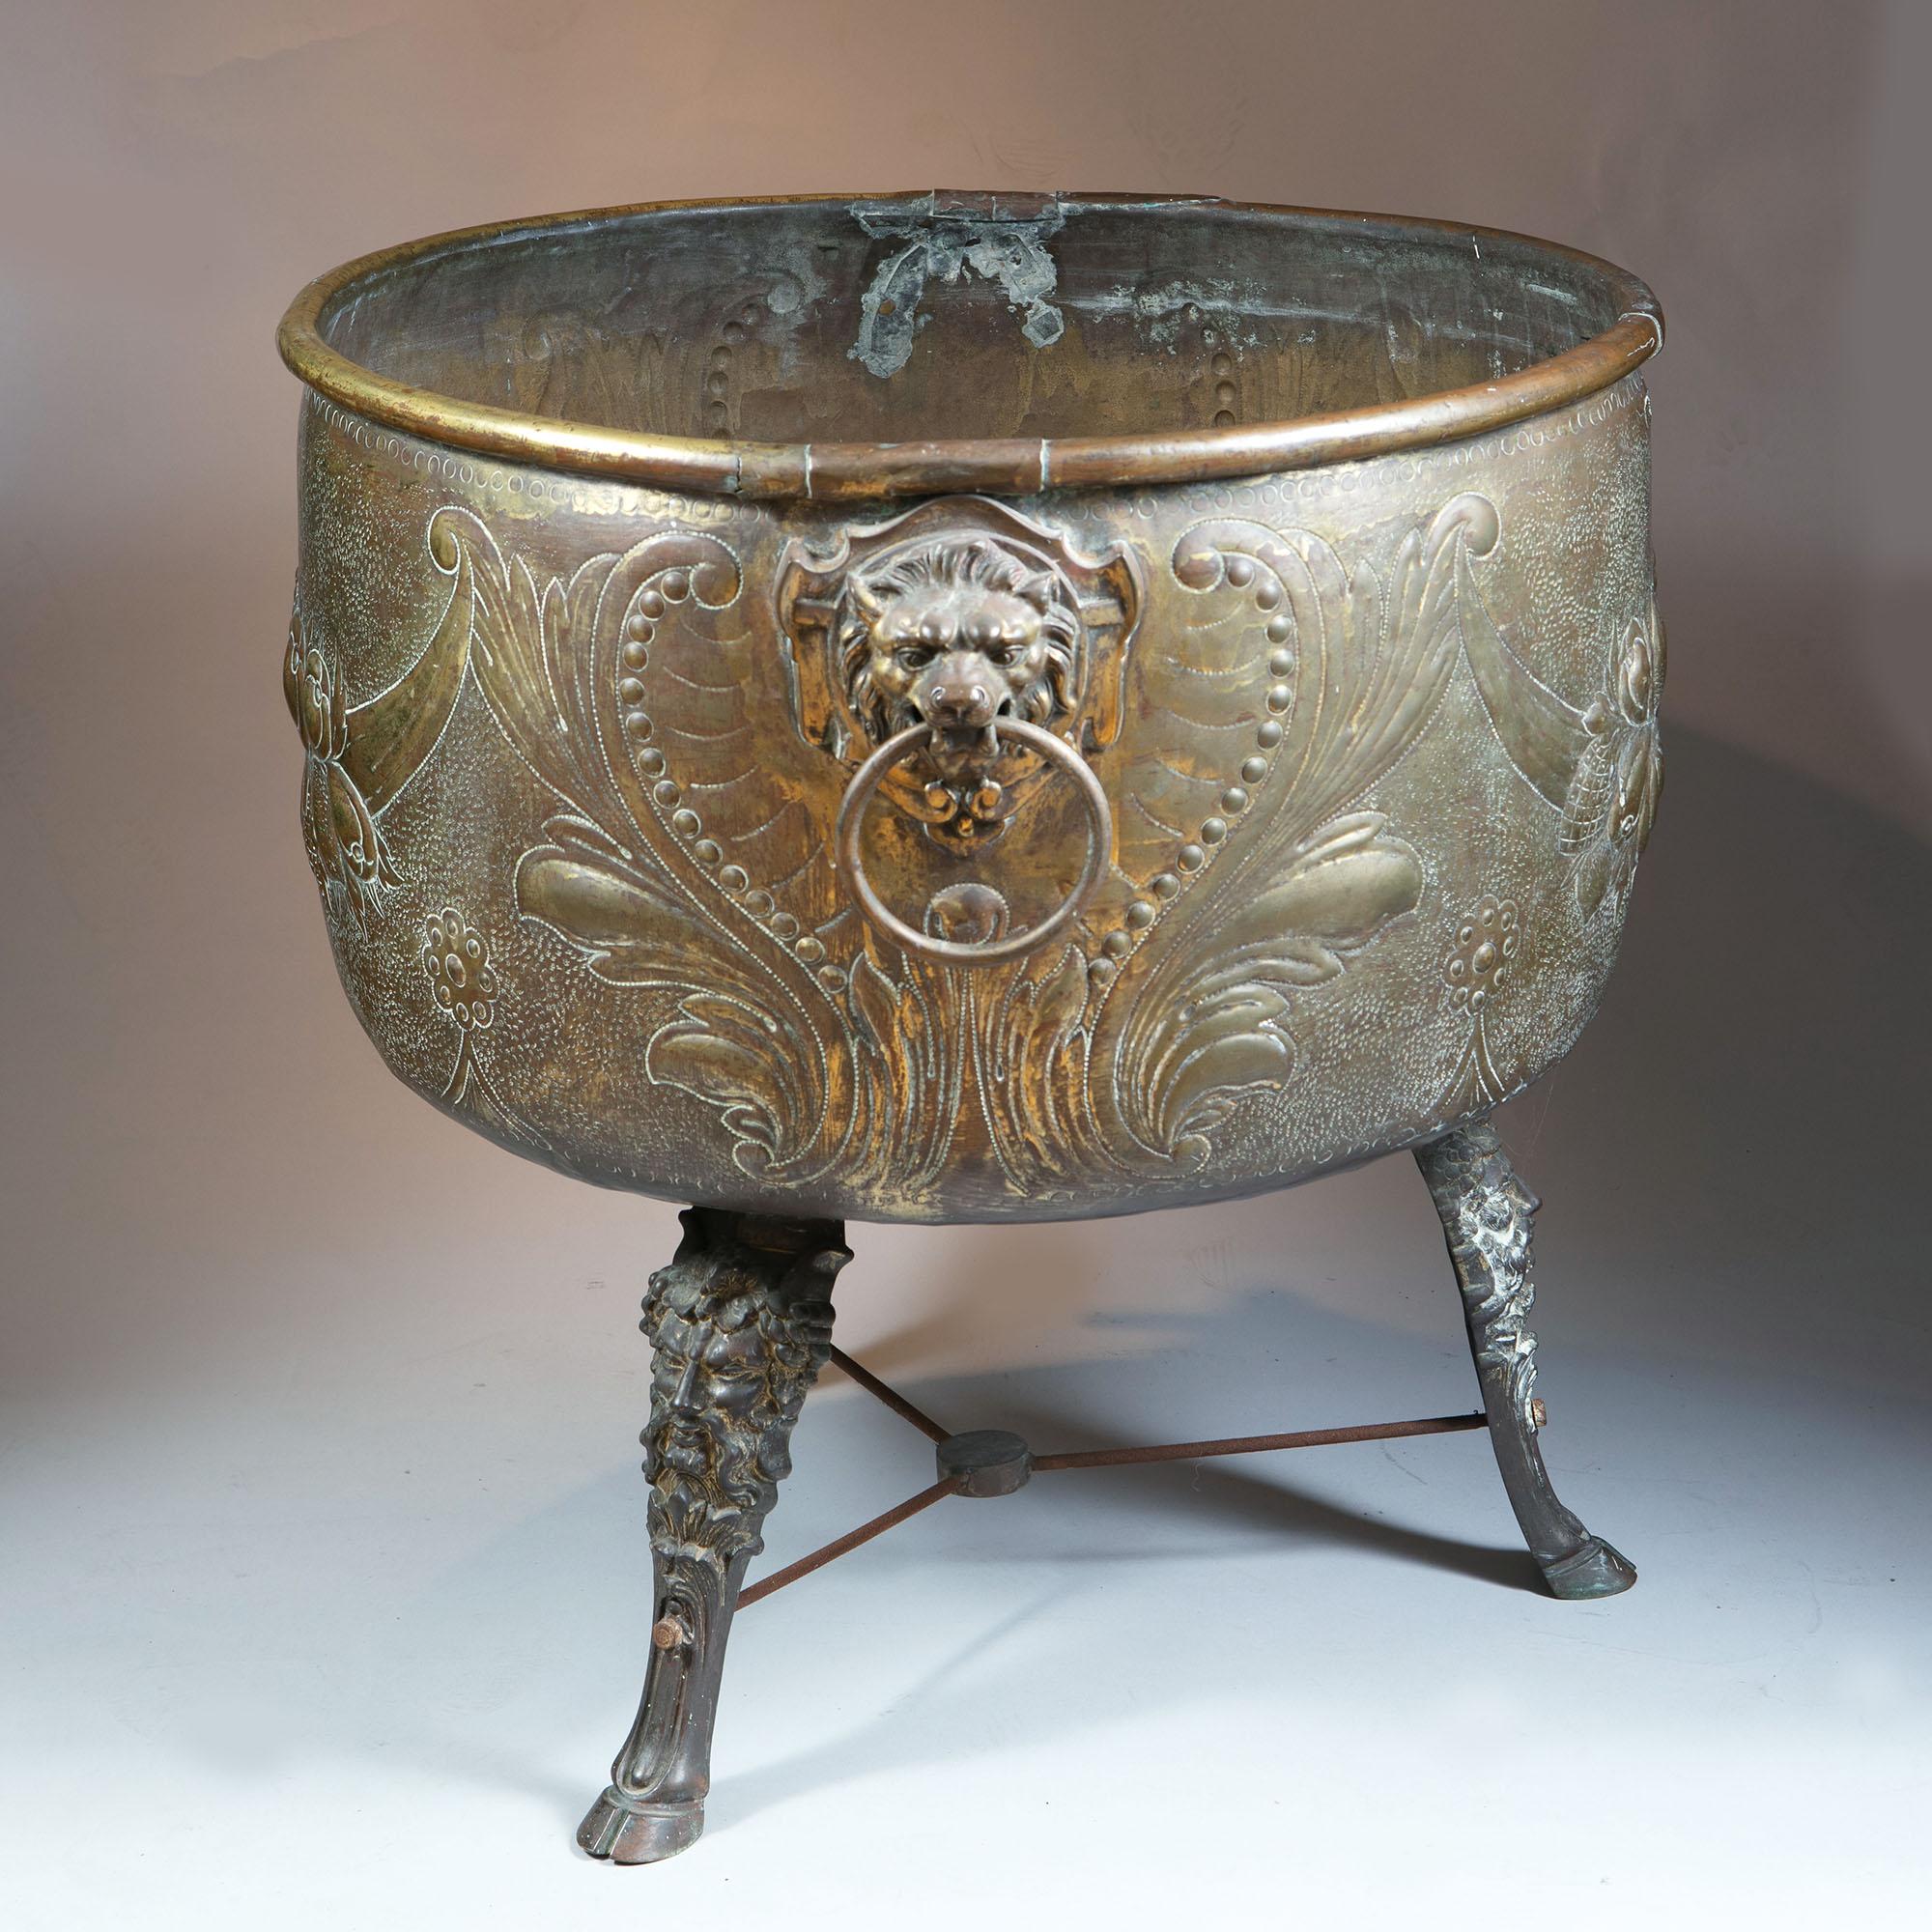 A monumental 19th century repoussé brass log bin, Dutch c.1860, lion mask ring handles to either side, supported on three legs with flamboyant lion masks above neat hoof feet, iron rod stretchers beneath linked by central ring, strikingly exuberant